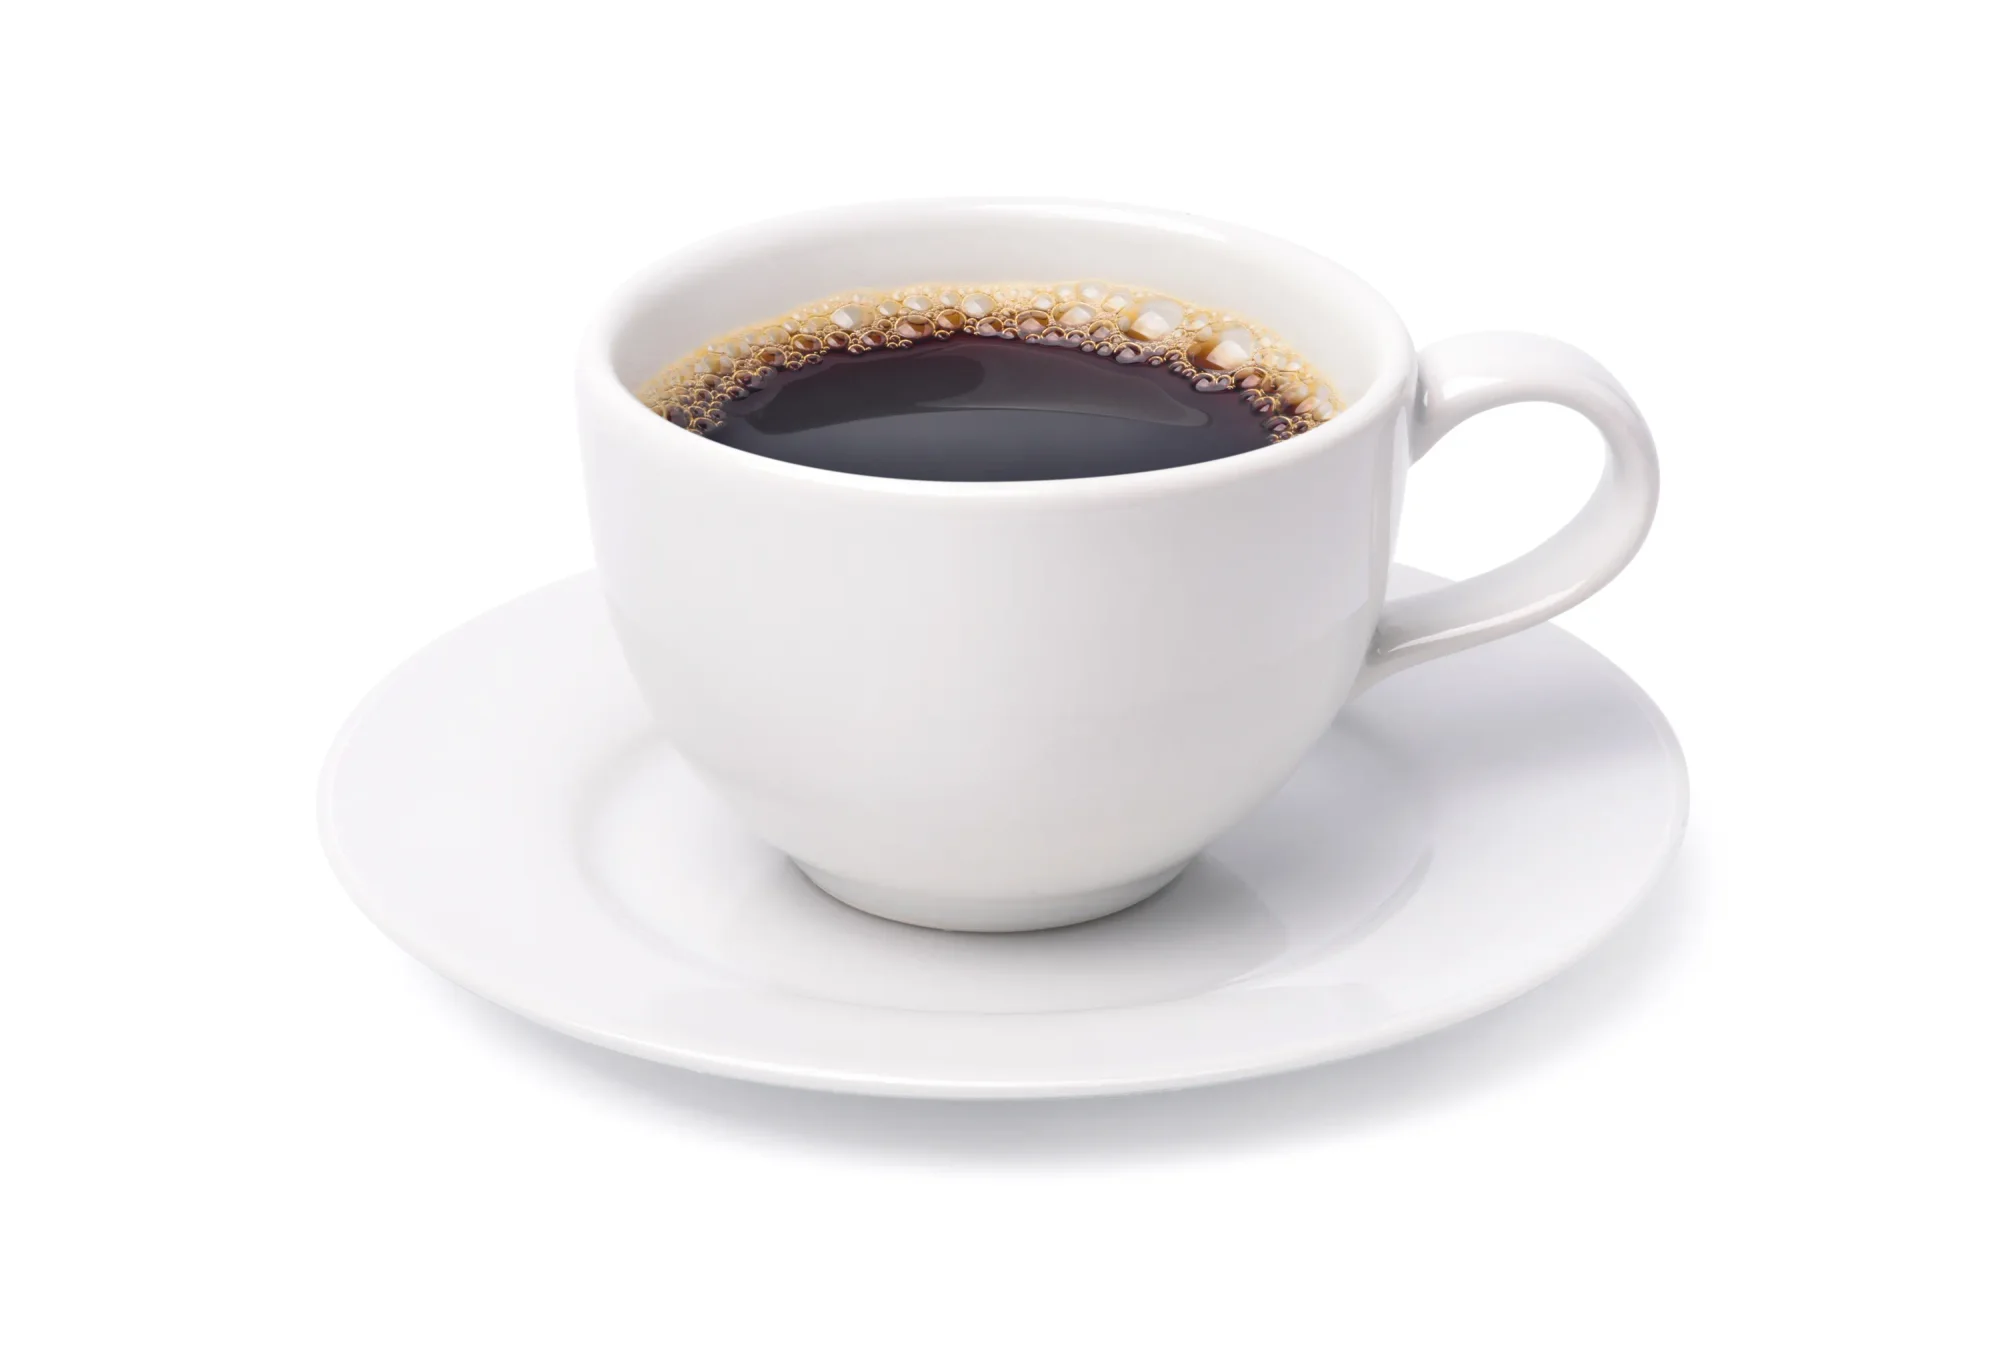 White cup of black coffee isolated on white background